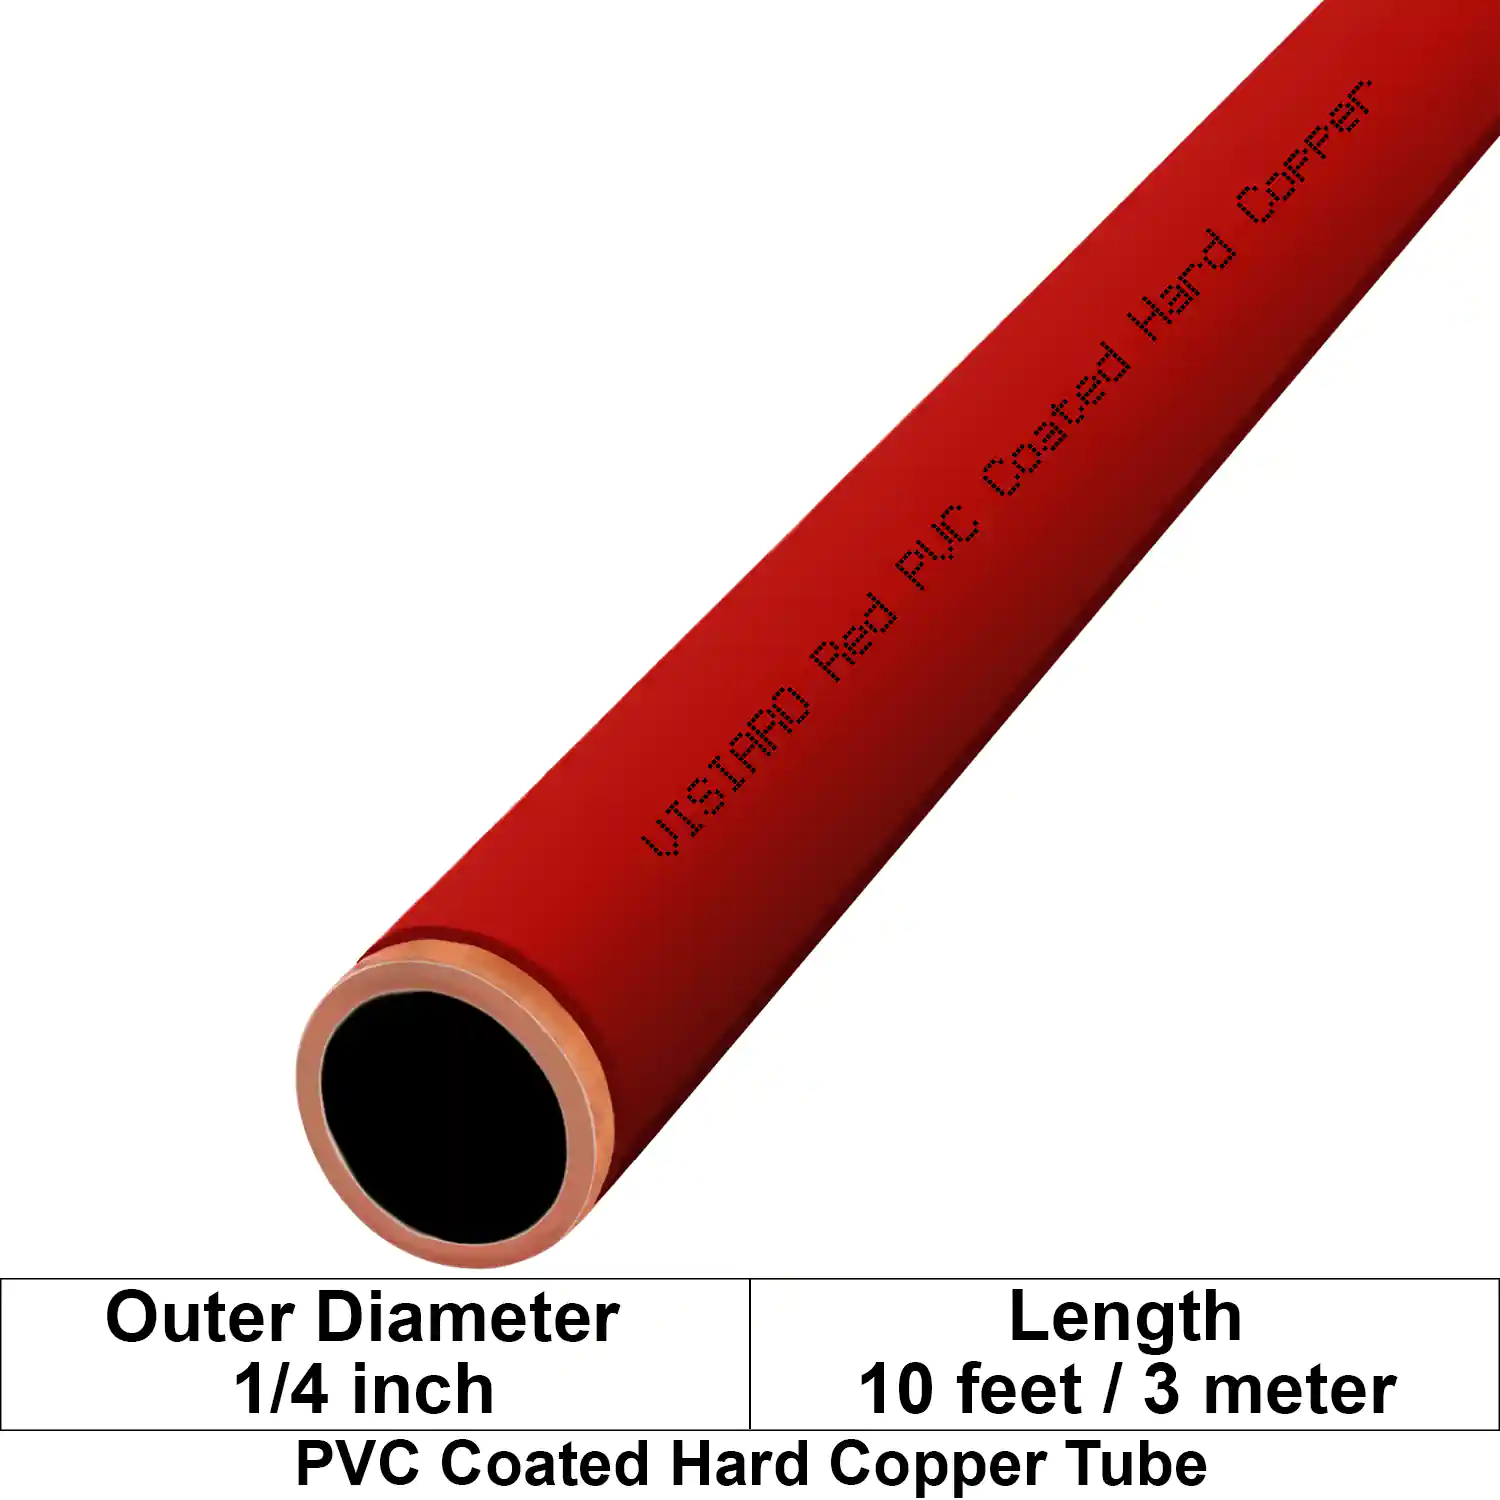 Visiaro Red PVC Coated Hard Copper Tube 10ft long Outer Diameter - 1/4 inch